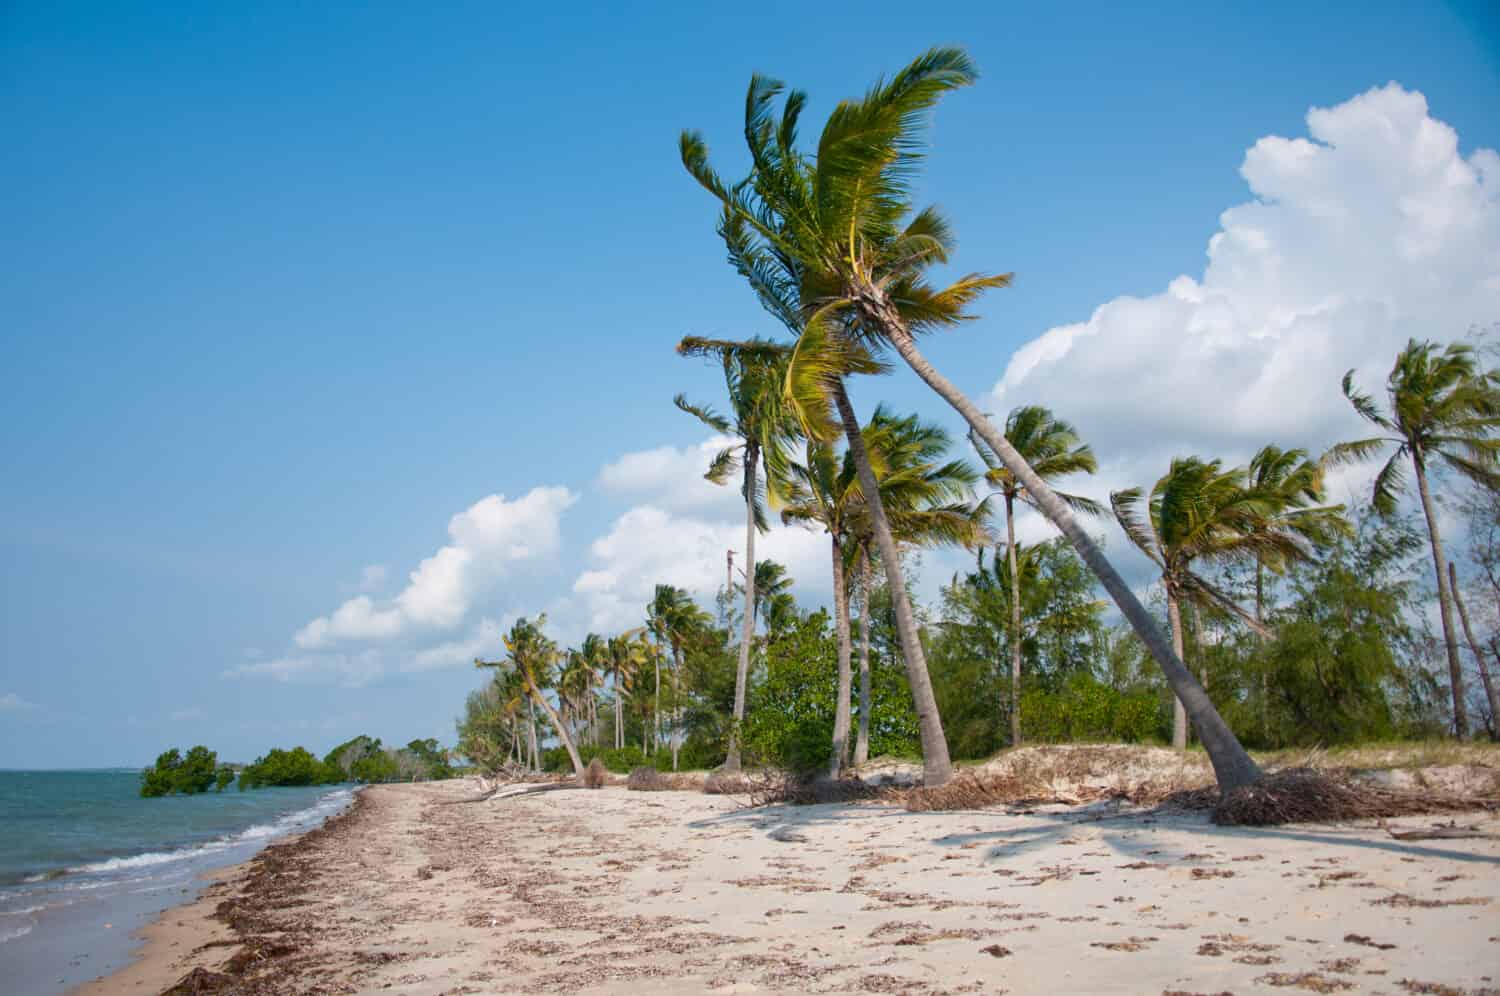 coconut palms on the beach in the indian ocean - saadani national park in tanzania